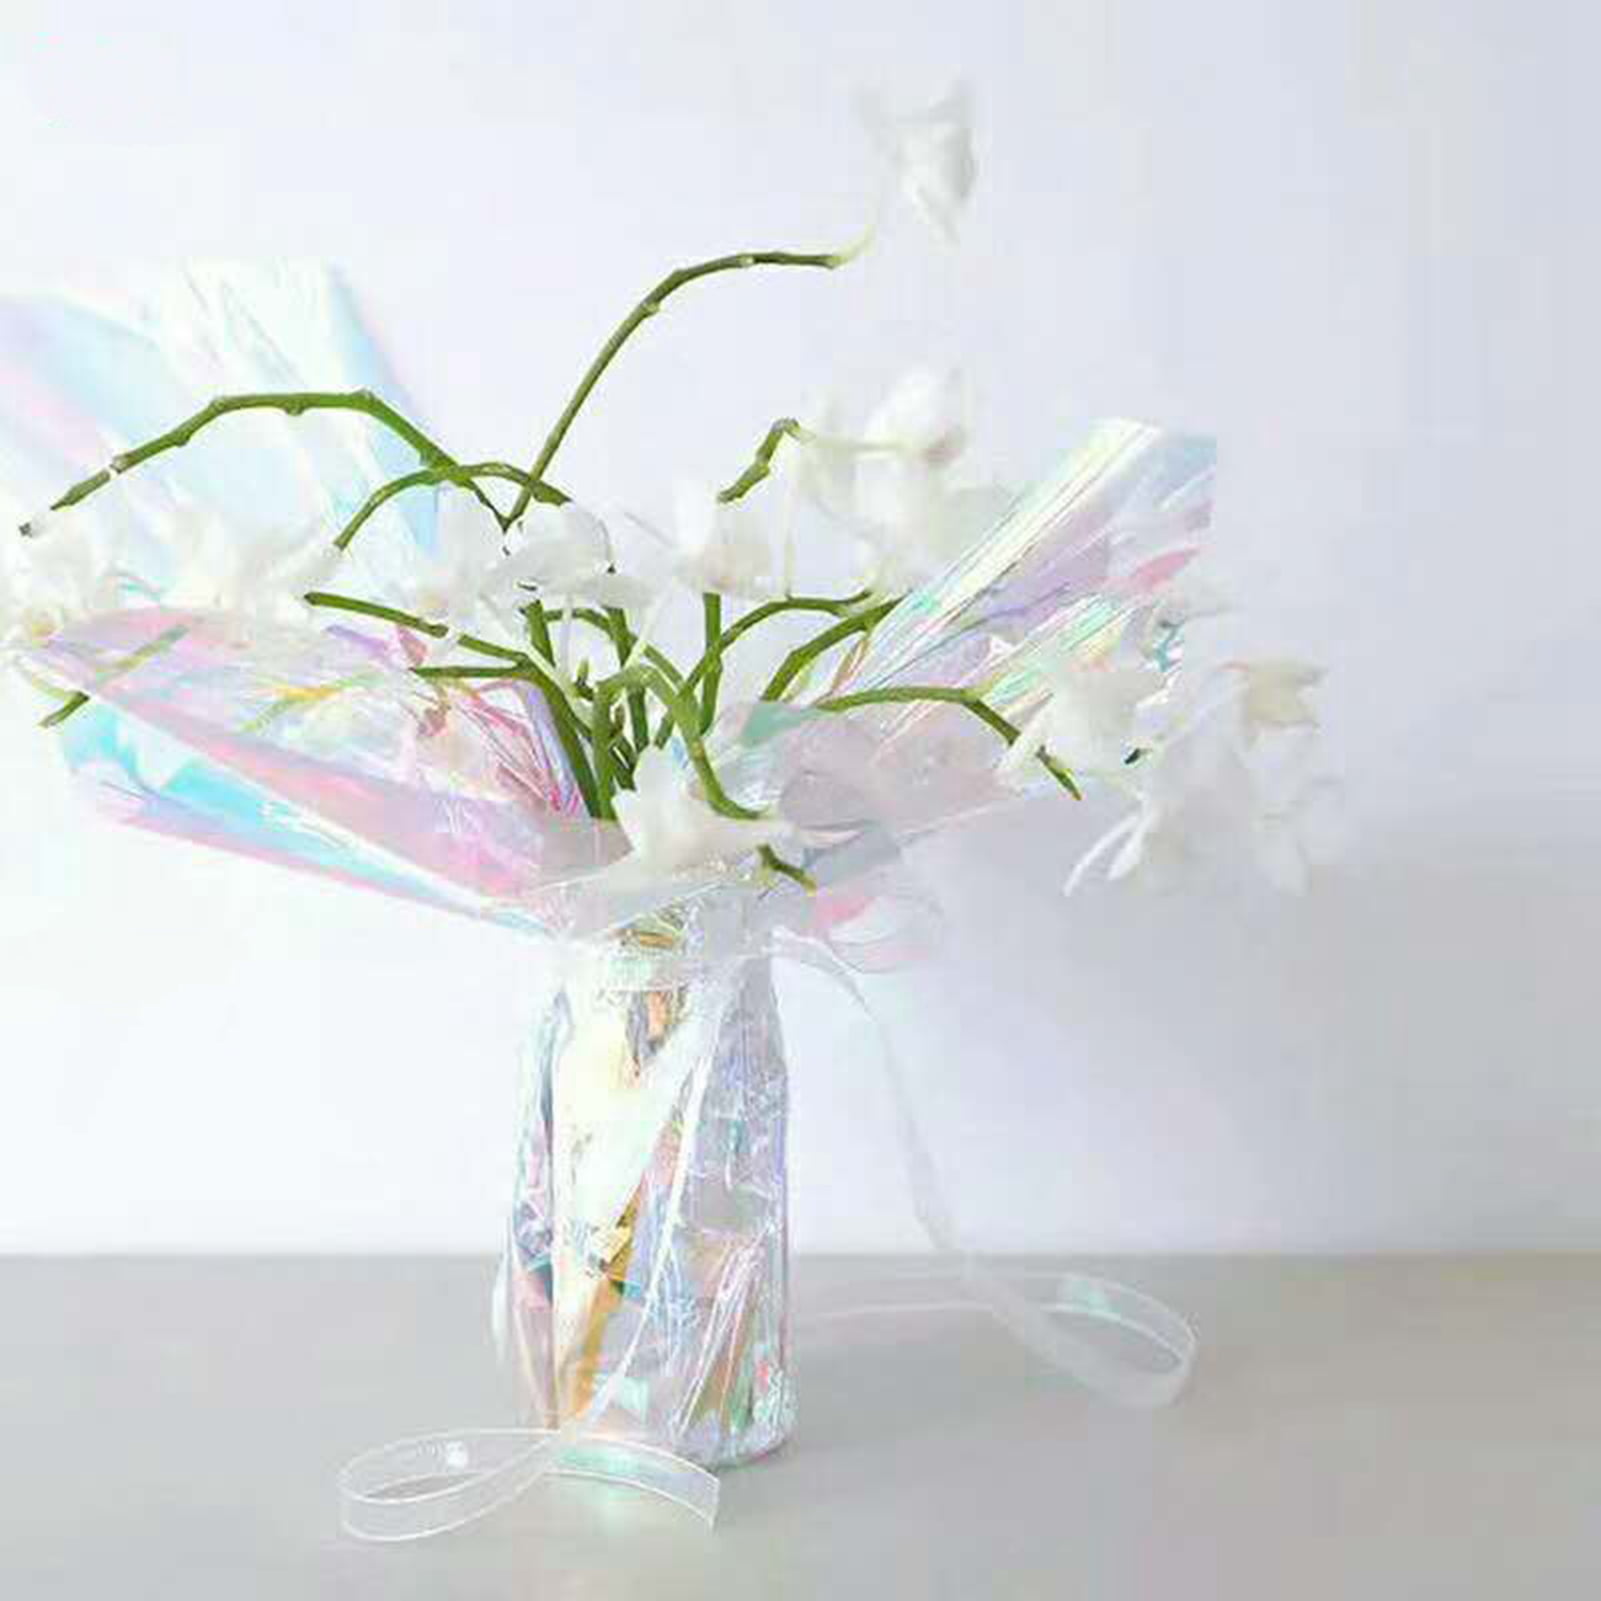 Holographic Chameleon Clear Flower/Gift Wrapping Paper, Waterproof